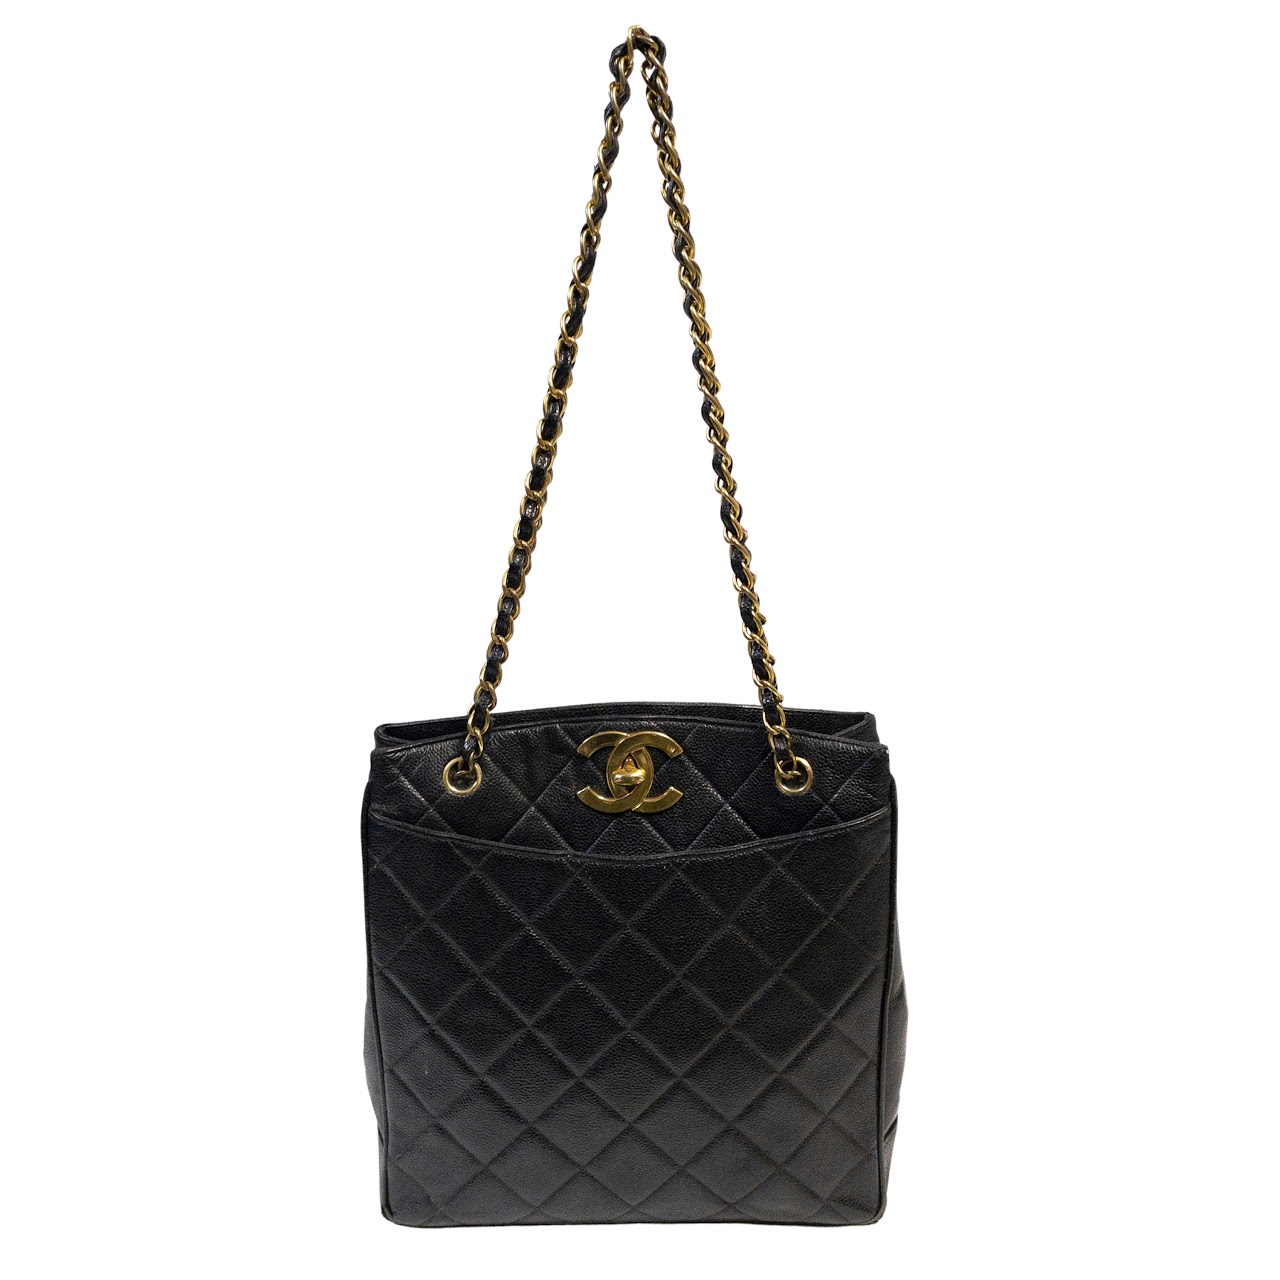 Chanel Vintage CC Caviar Leather Carryall Tote Bag